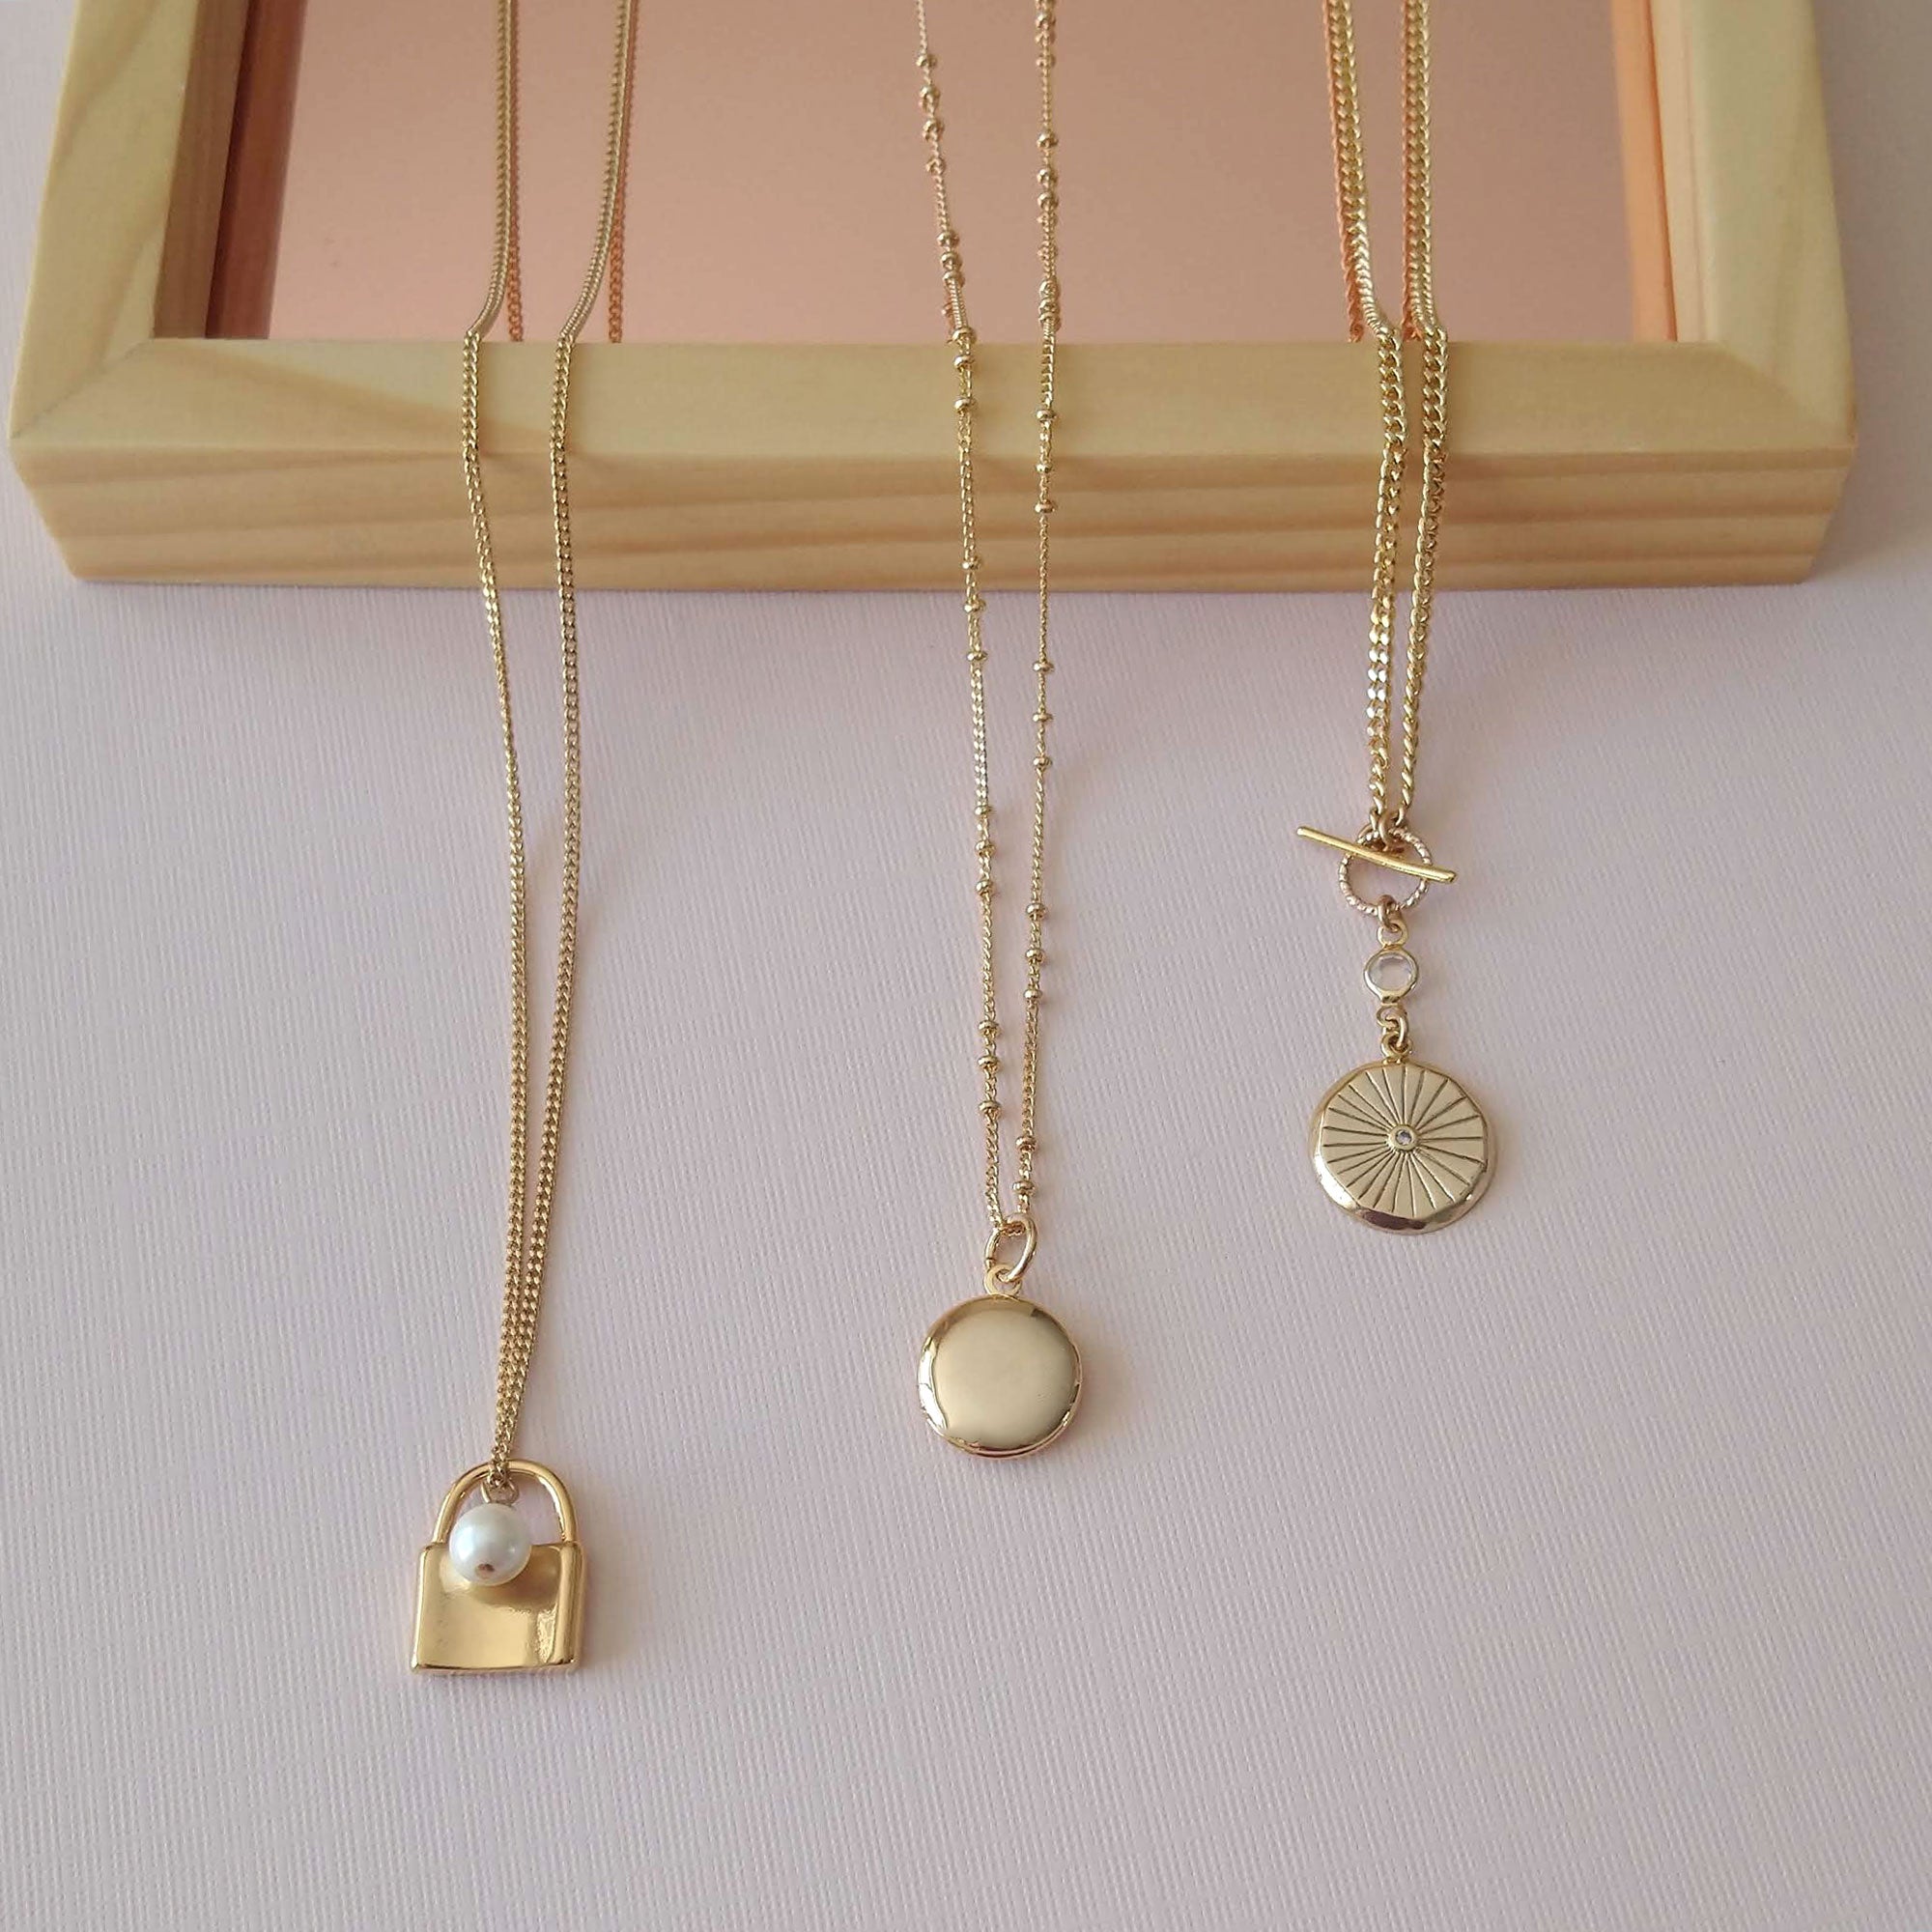 long necklaces lockets medallions